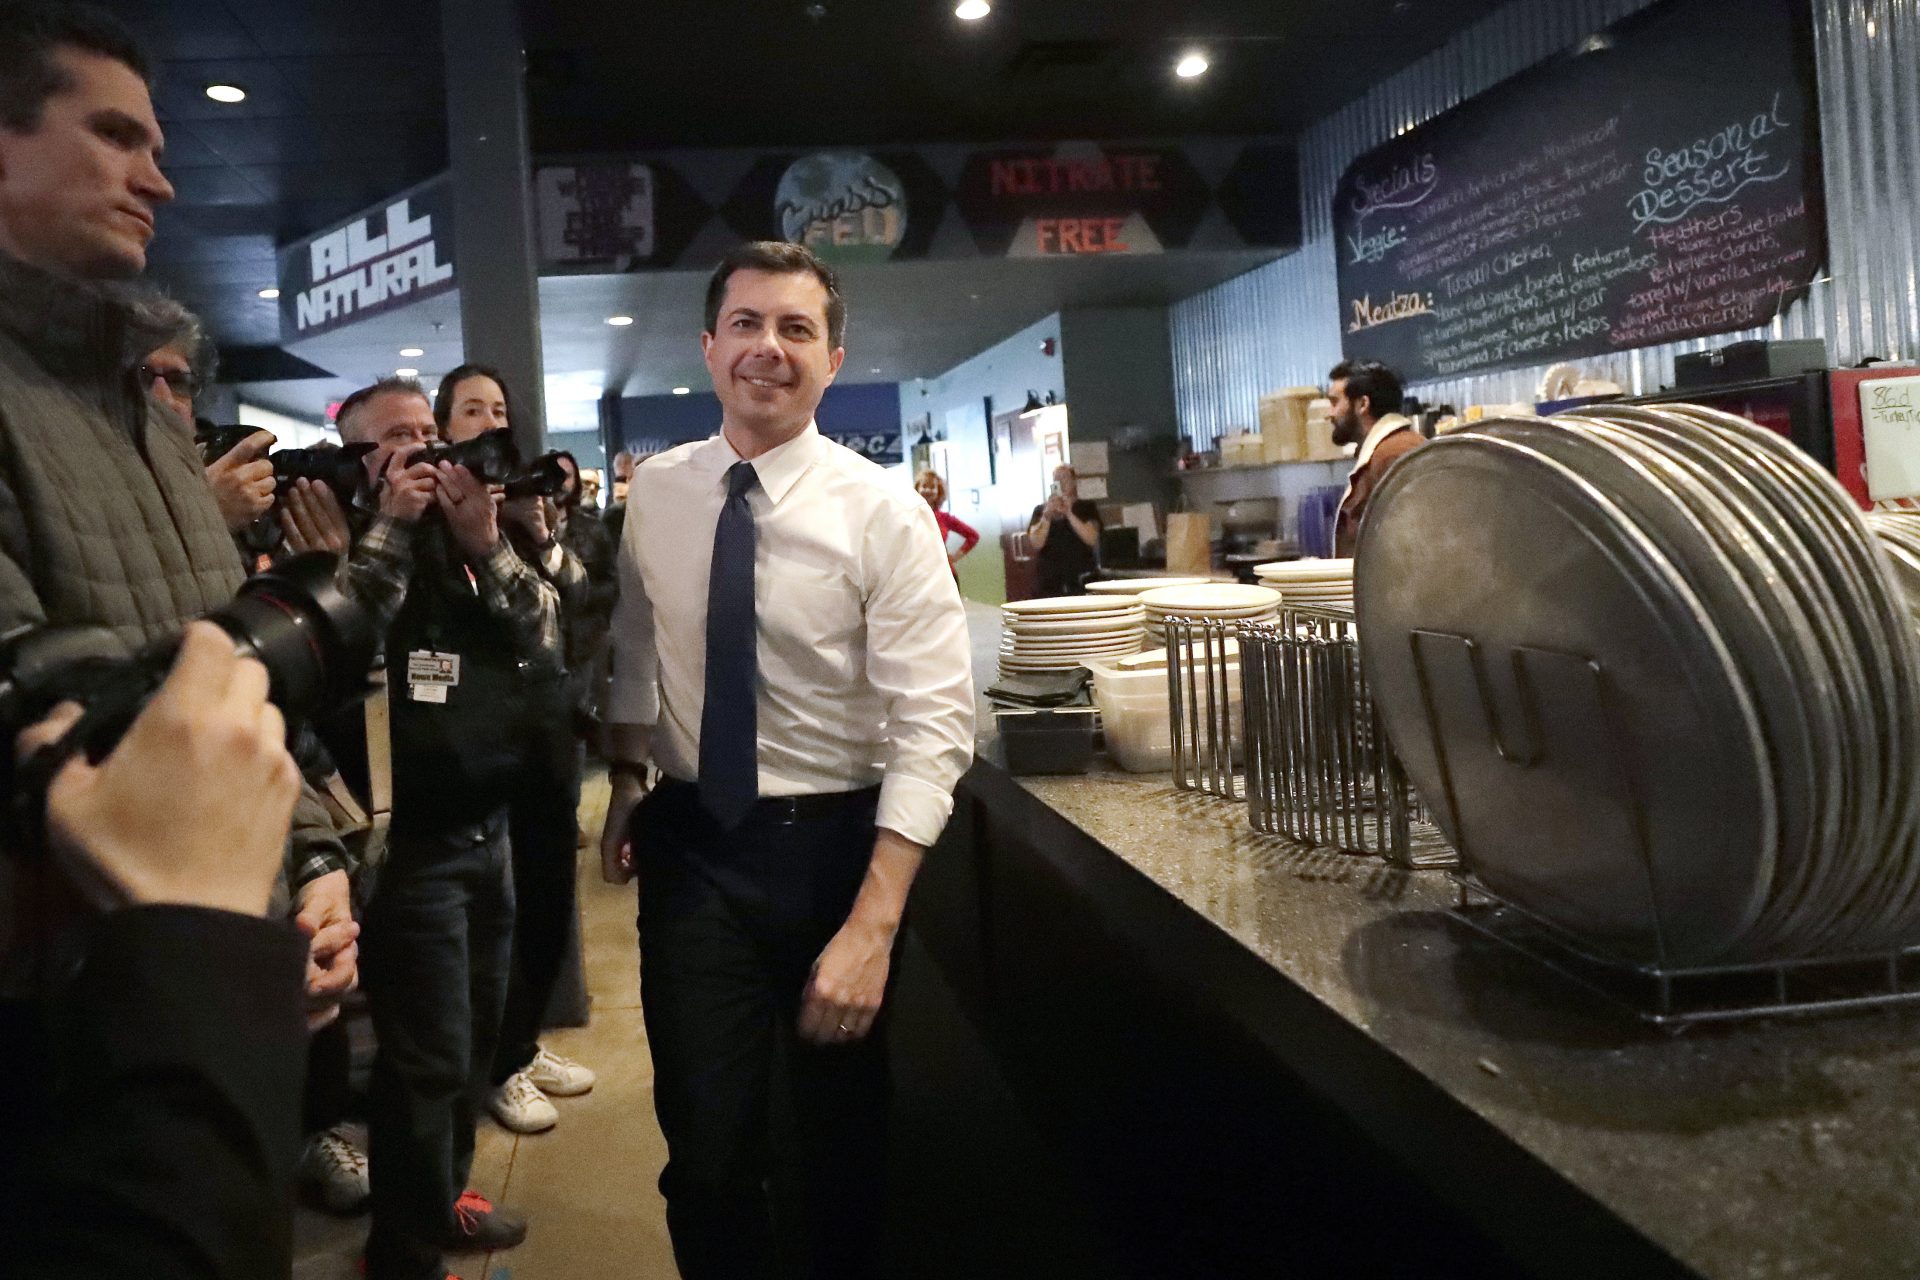 Democratic presidential candidate former South Bend, Ind., Mayor Pete Buttigieg arrives at Community Oven Pizza for a campaign event, Tuesday, Feb. 4, 2020, in Hampton, N.H.